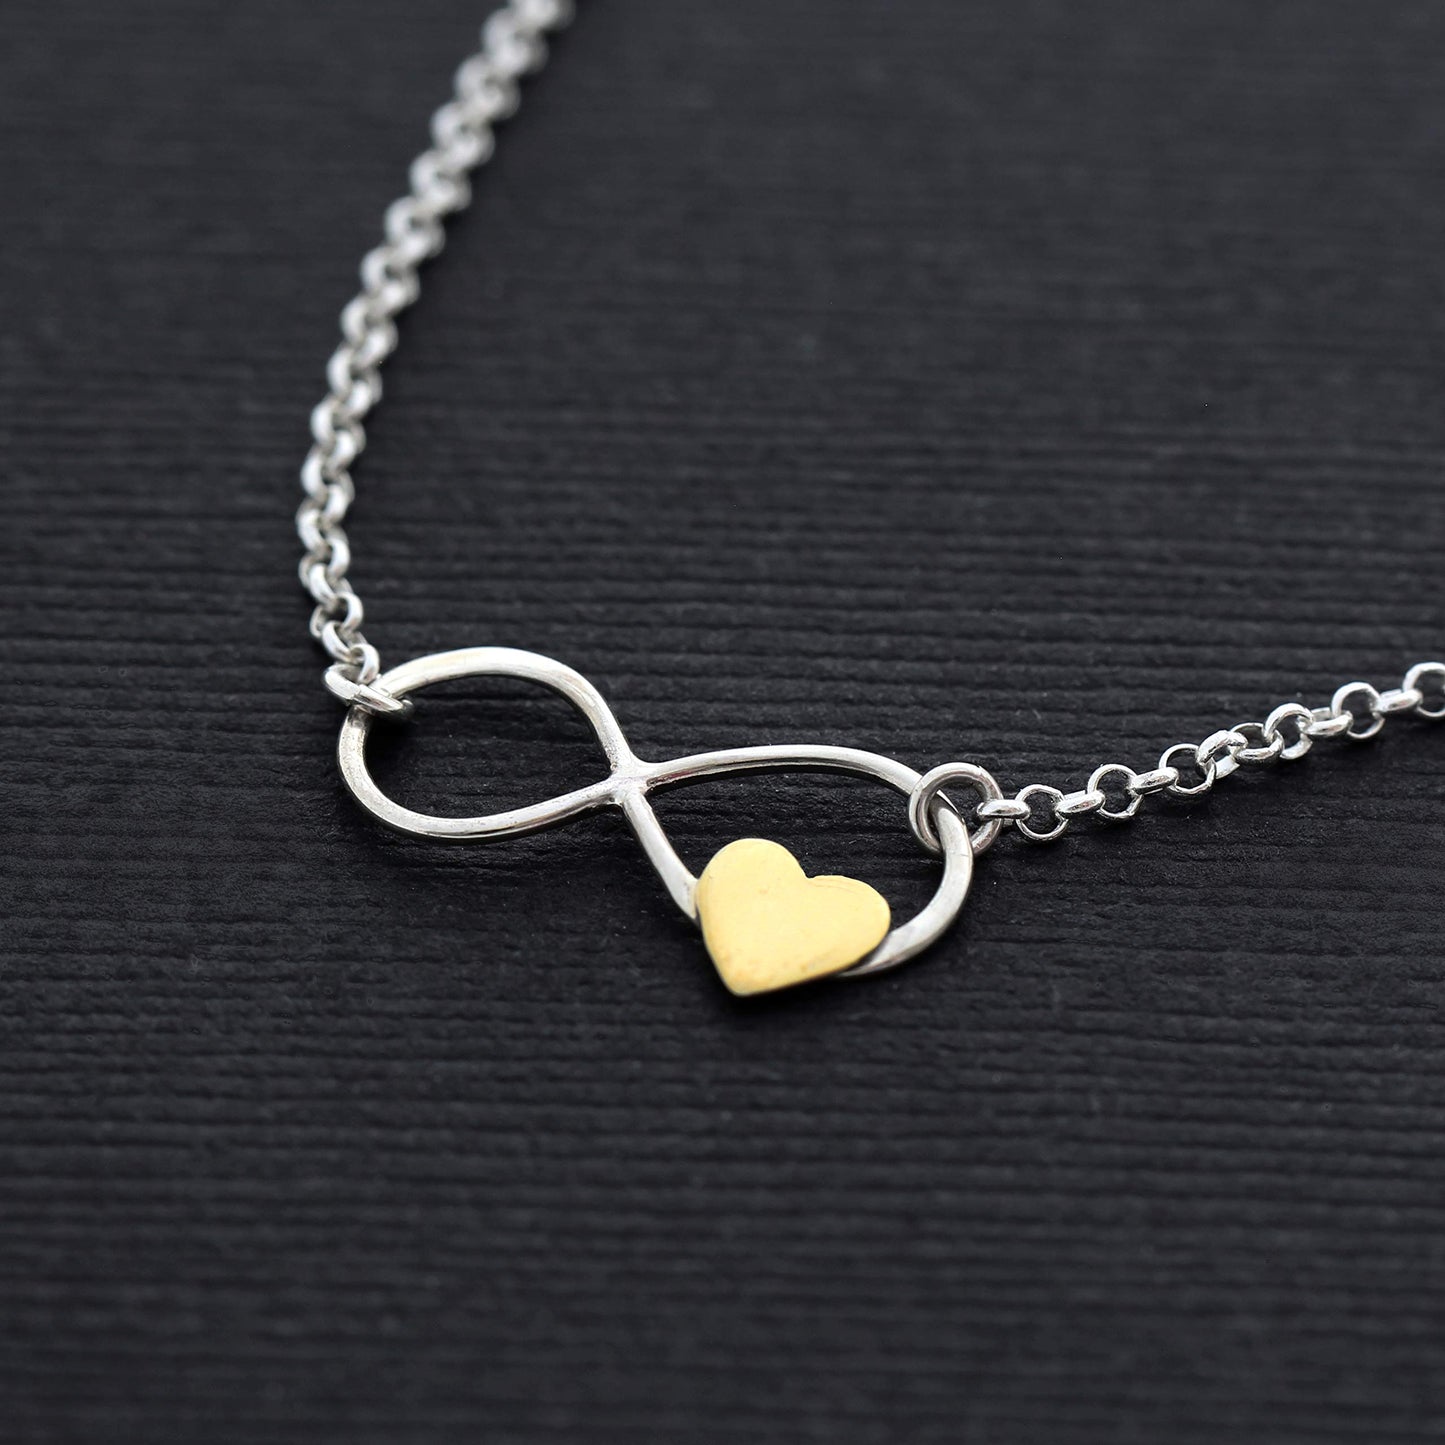 A Charmed Impression Nanny Gifts from Kids for Women • Gift for Nanny Bracelet • Sterling Silver Bracelet • Babysitter Gratitude and Appreciation Jewelry • Best Nanny Ever • Infinity Gold Heart Charm